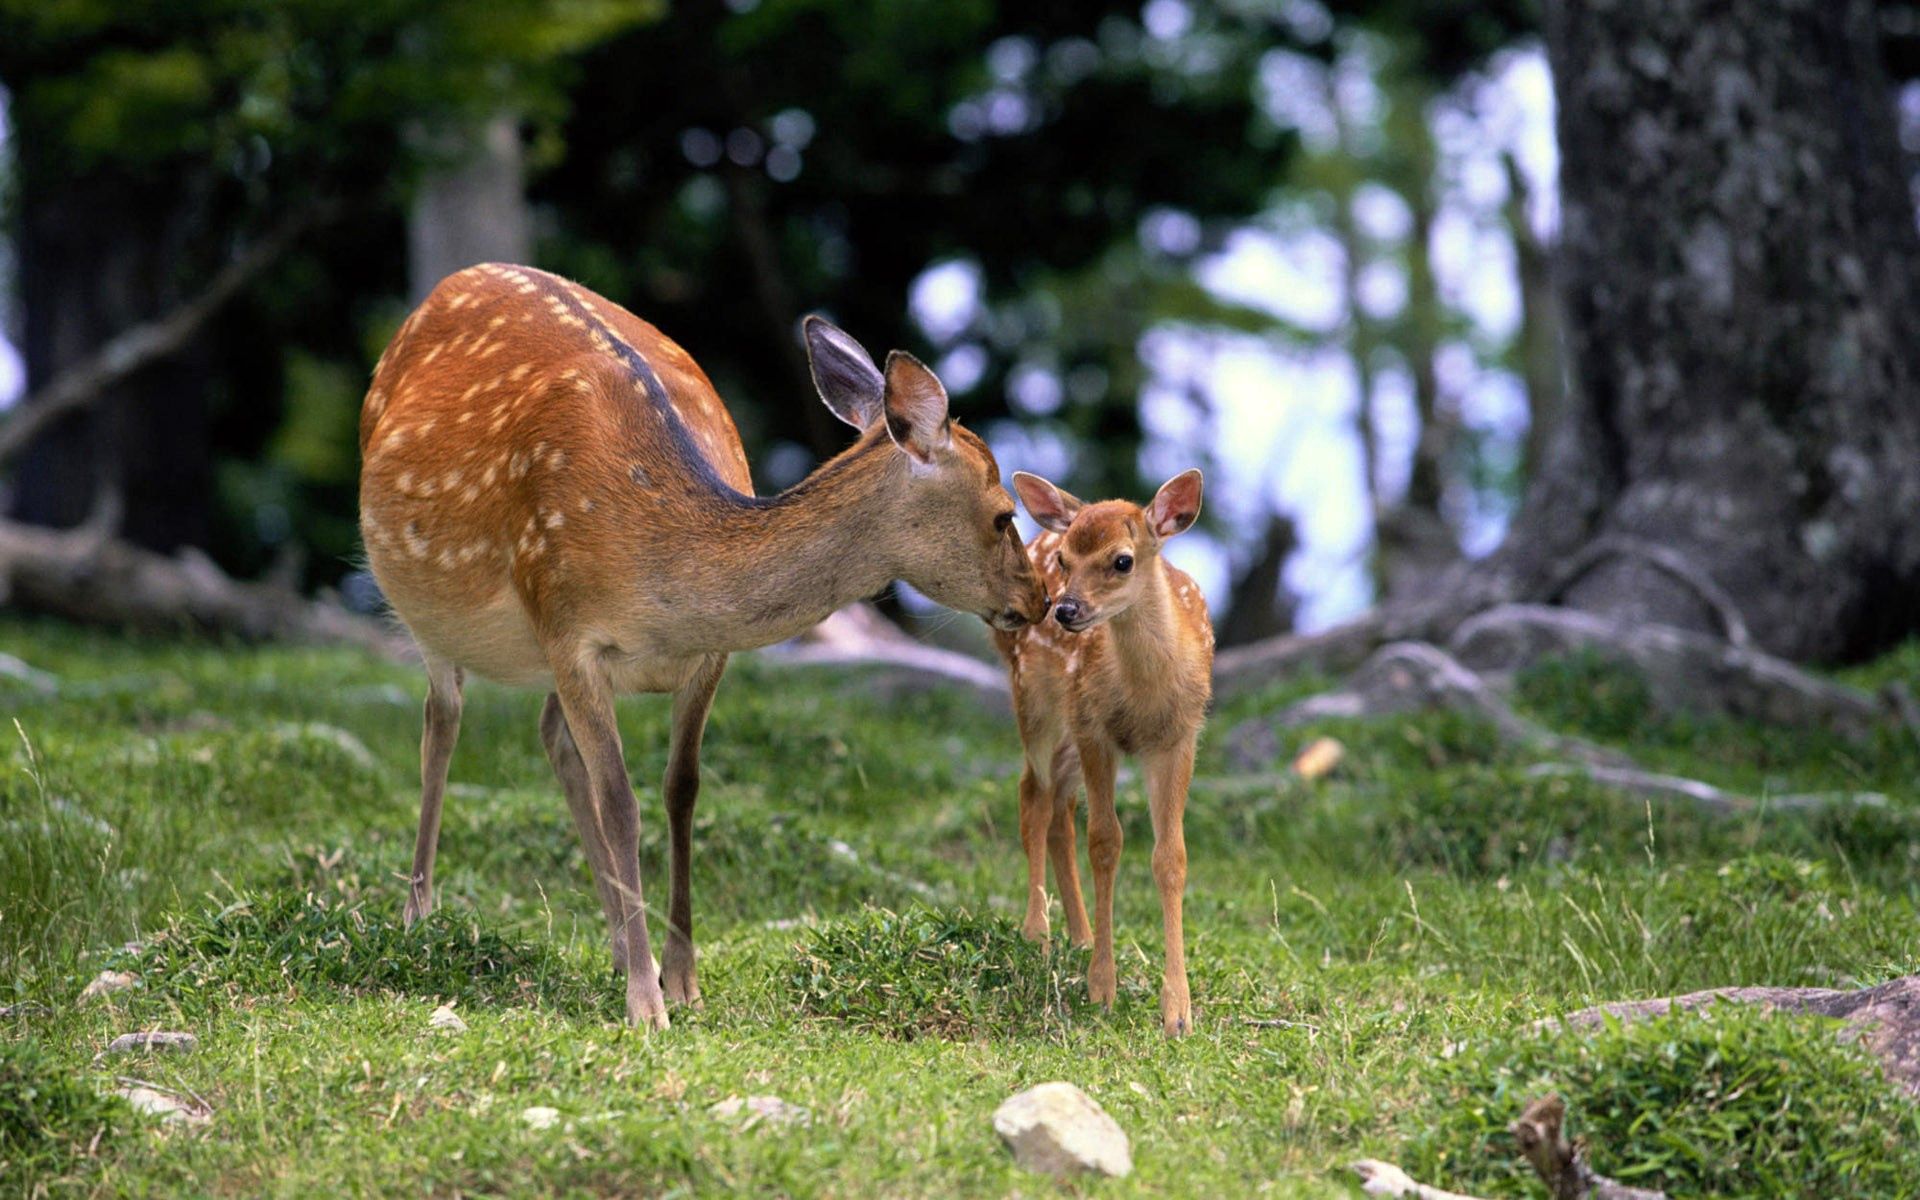 Full HD deer, animals, young, grass, forest, stroll, care, joey